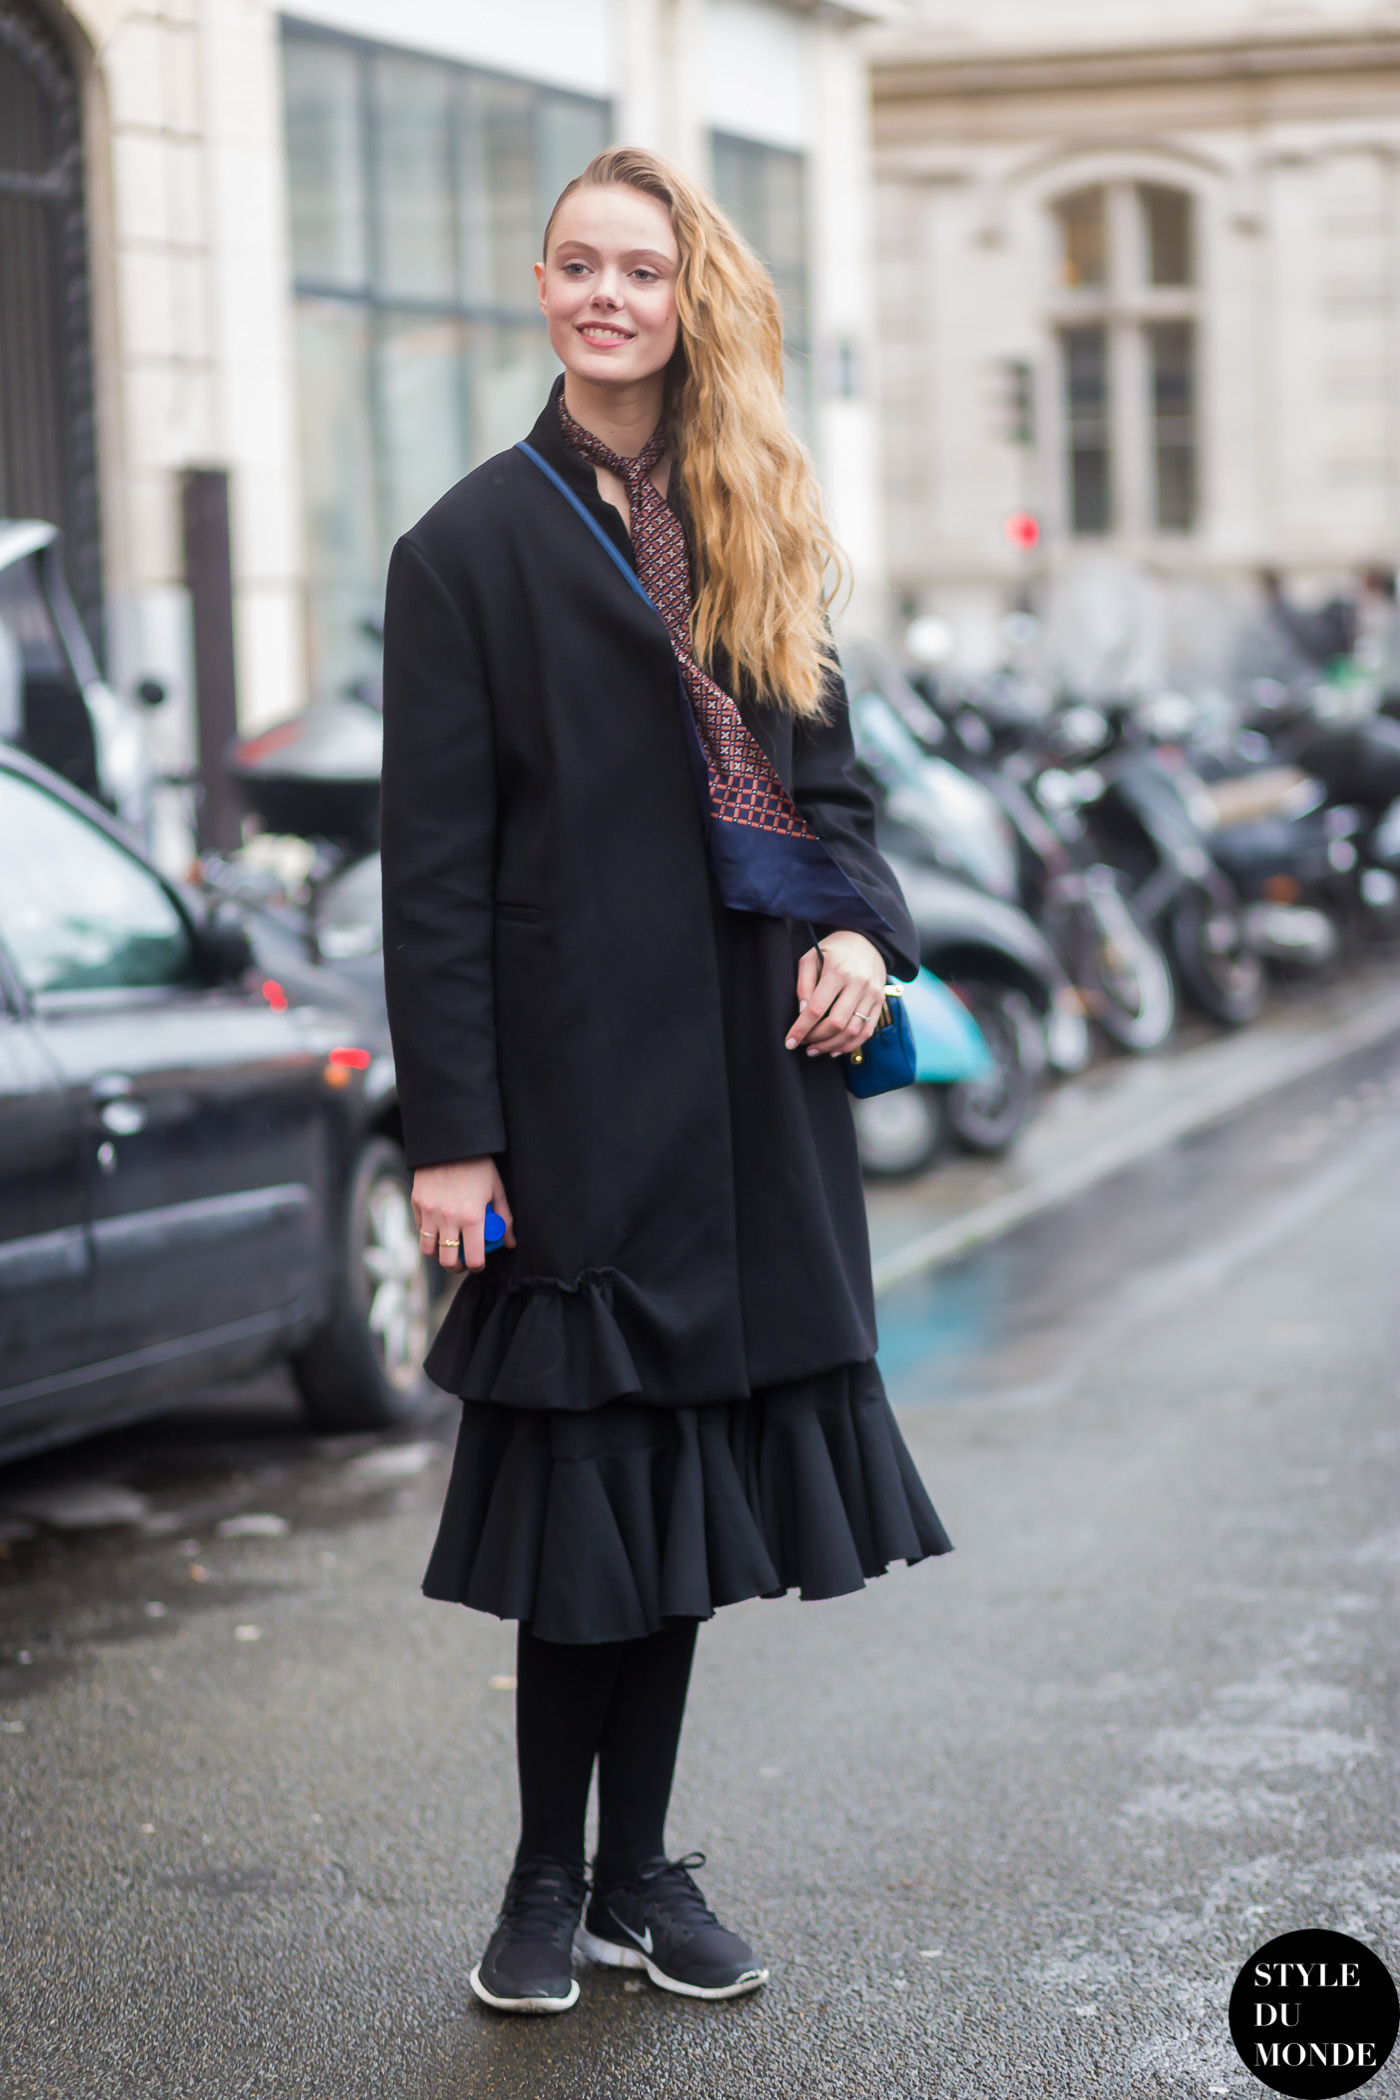 Haute Couture SS 2015 Street Style: Frida Gustavsson - STYLE DU MONDE ...